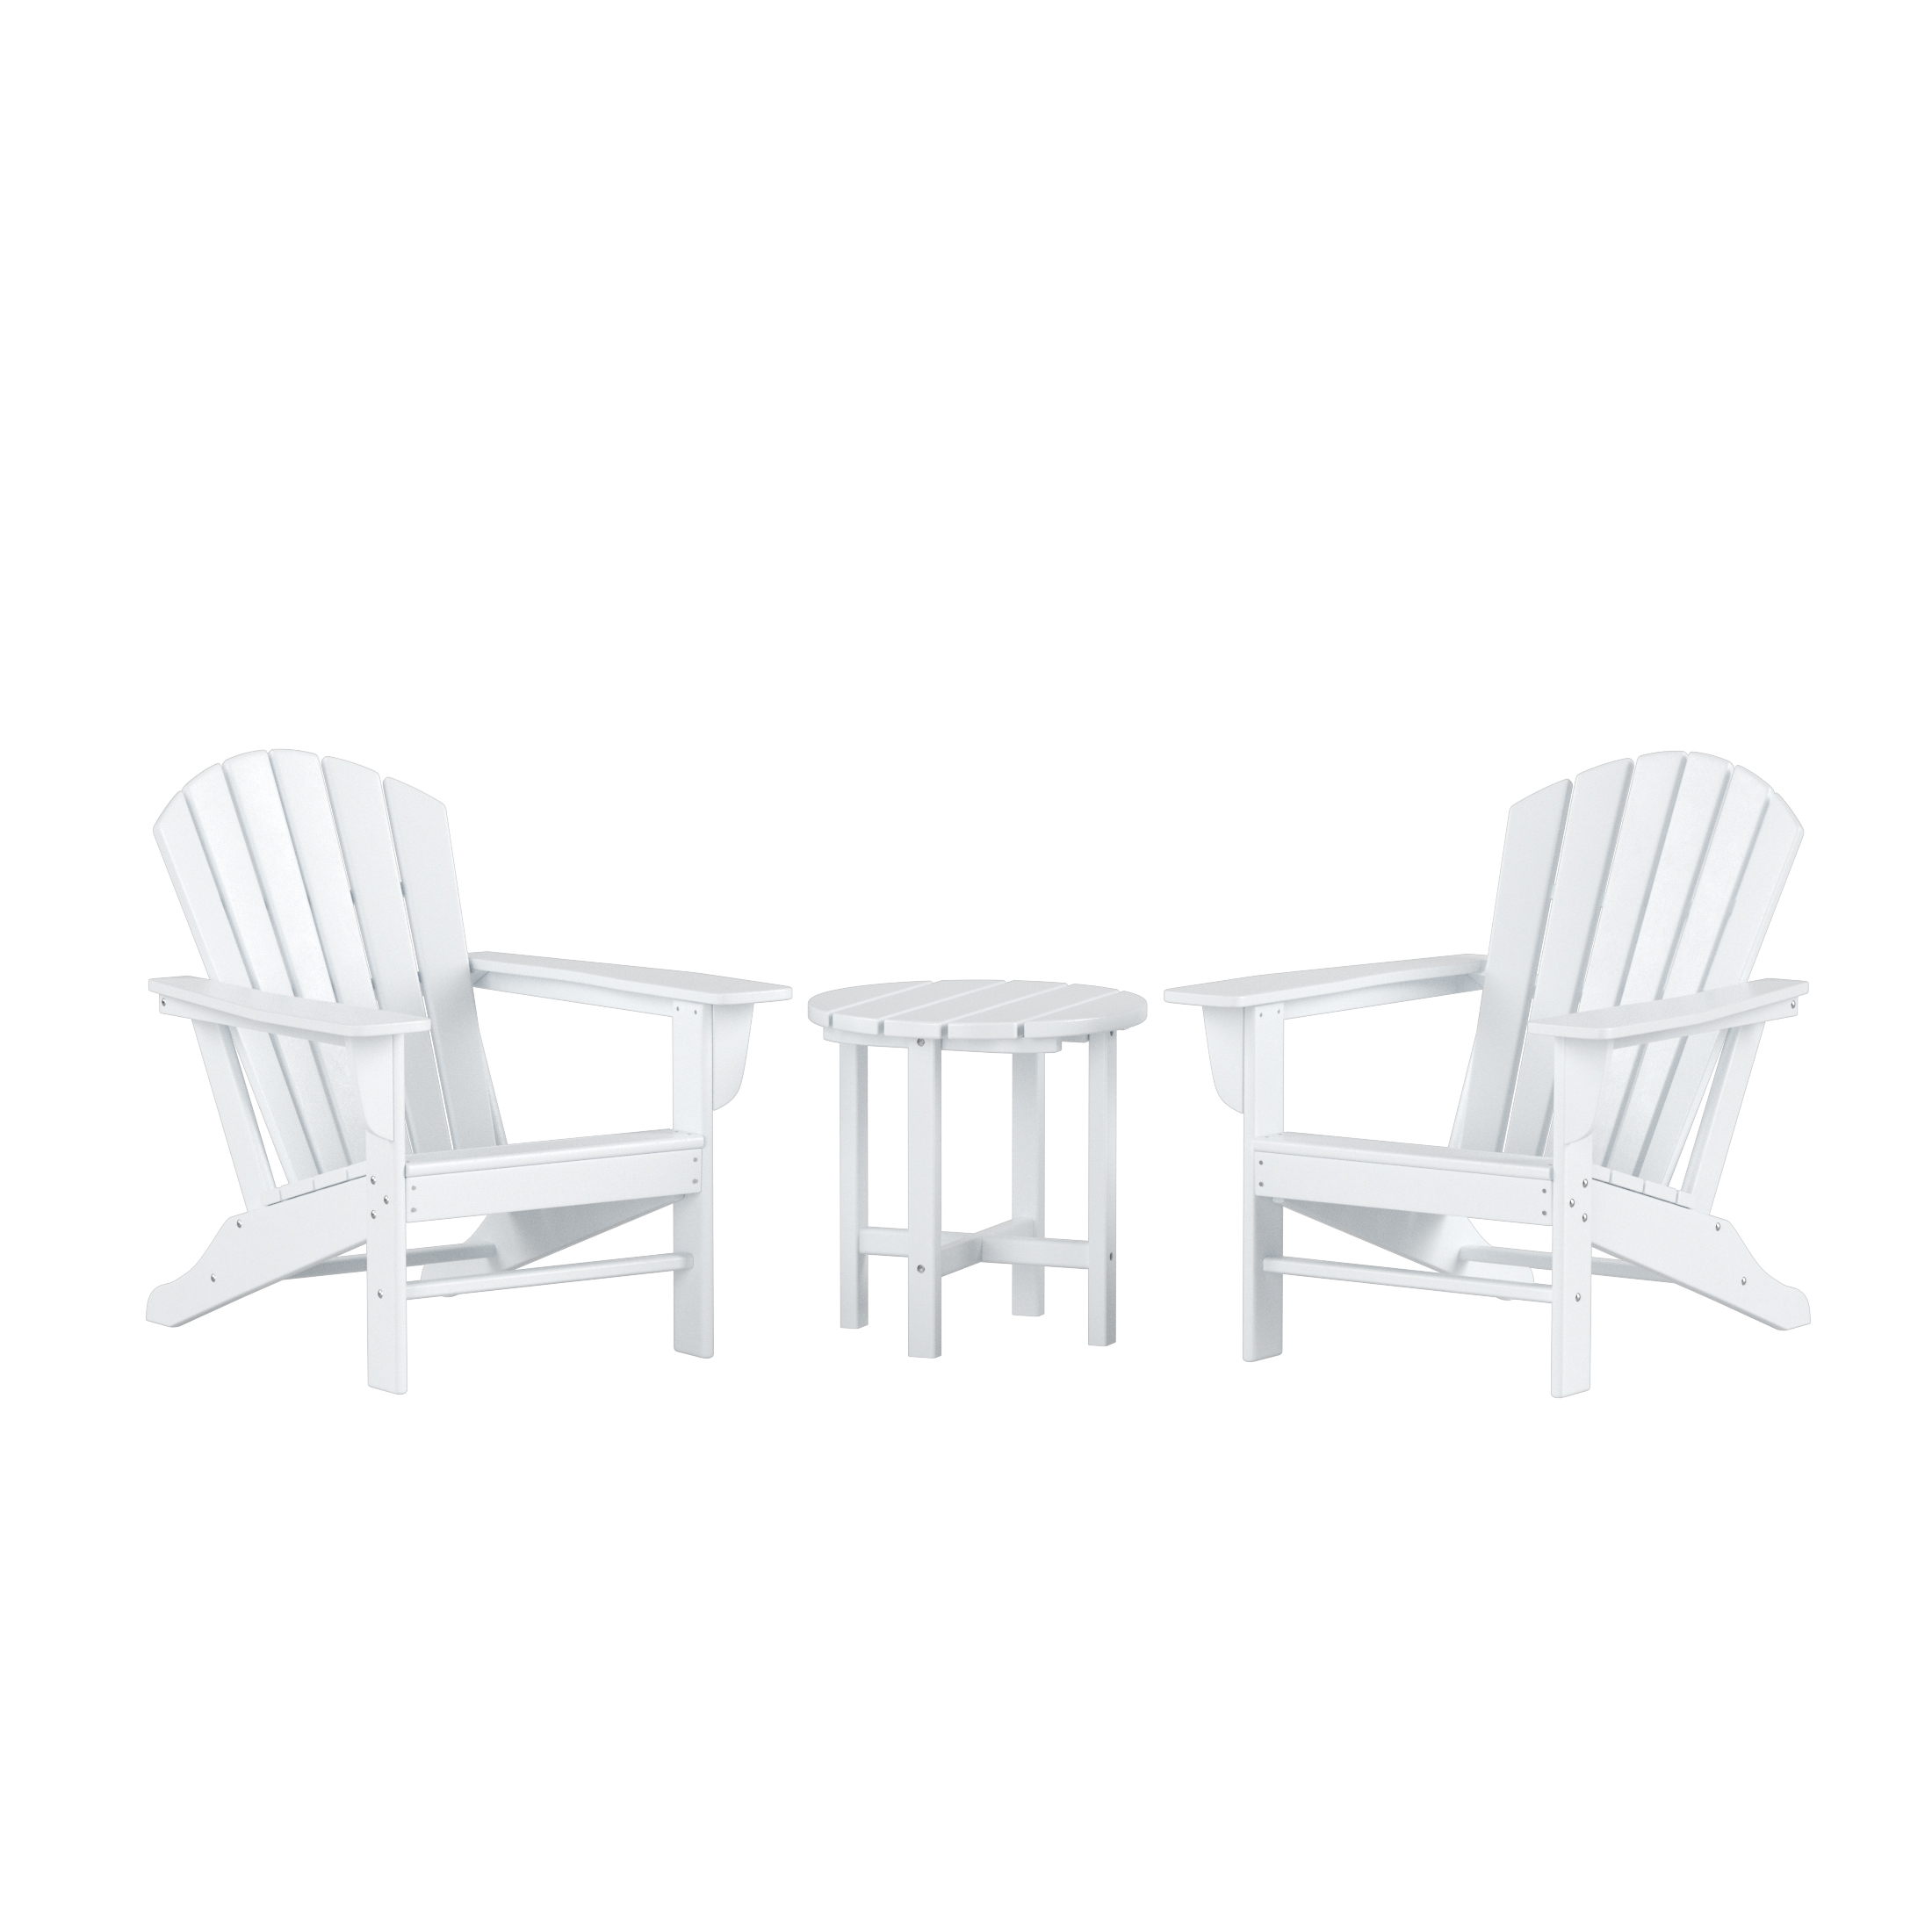 Garden 3-Piece Patio Adirondack Chair with Round Accent Side Table Set, White - image 2 of 6